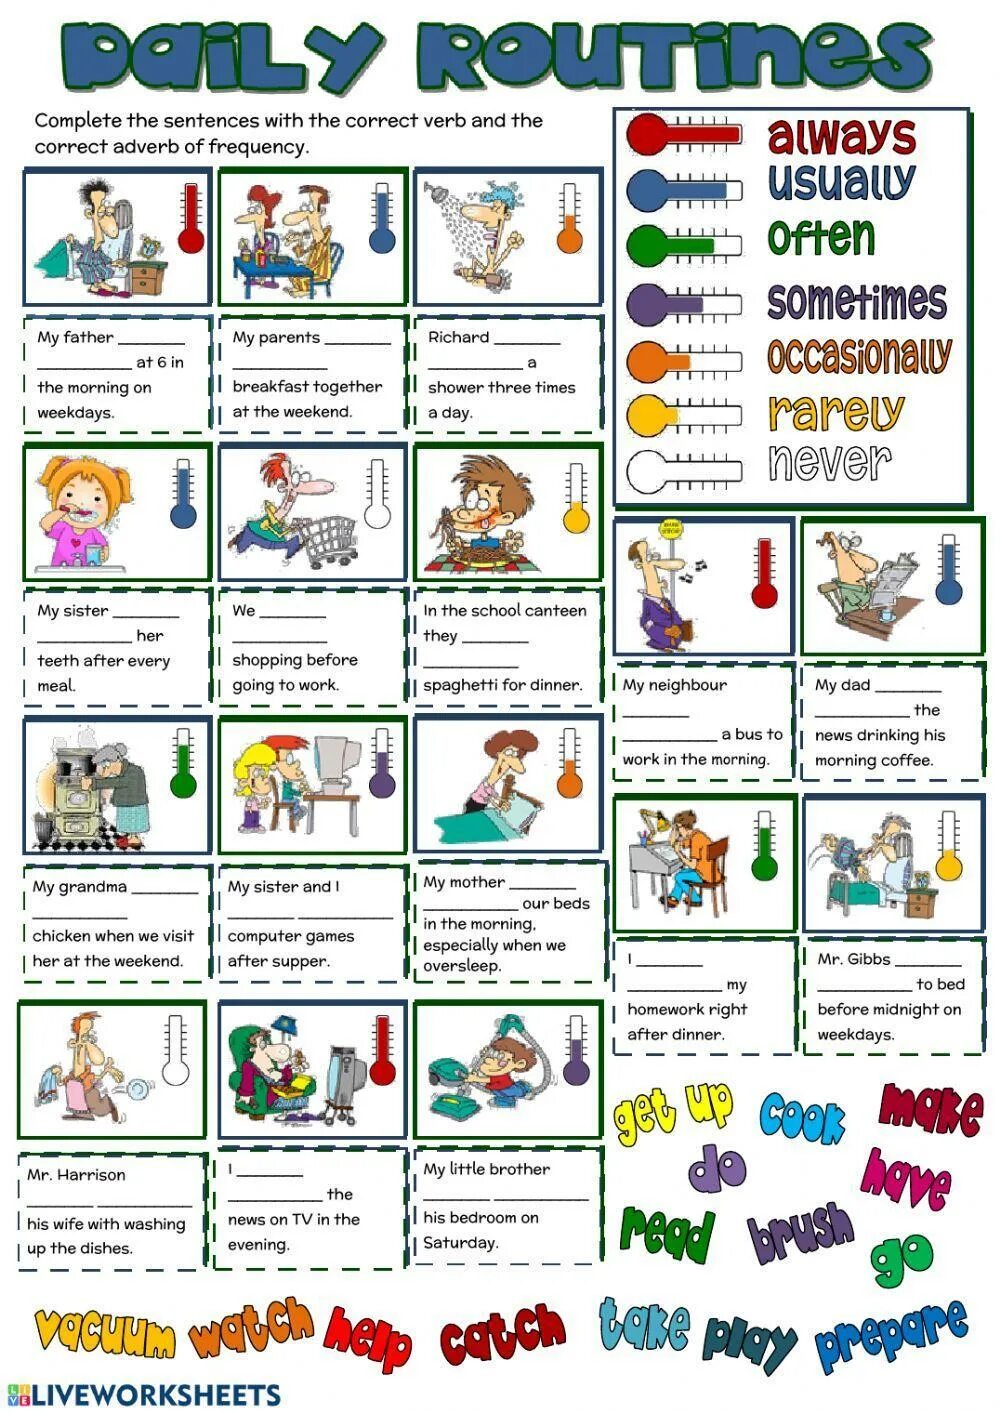 You often go shopping. Игры на Daily Routine. Упражнения Daily Routine present simple. Worksheets грамматика. Daily Routine для детей.